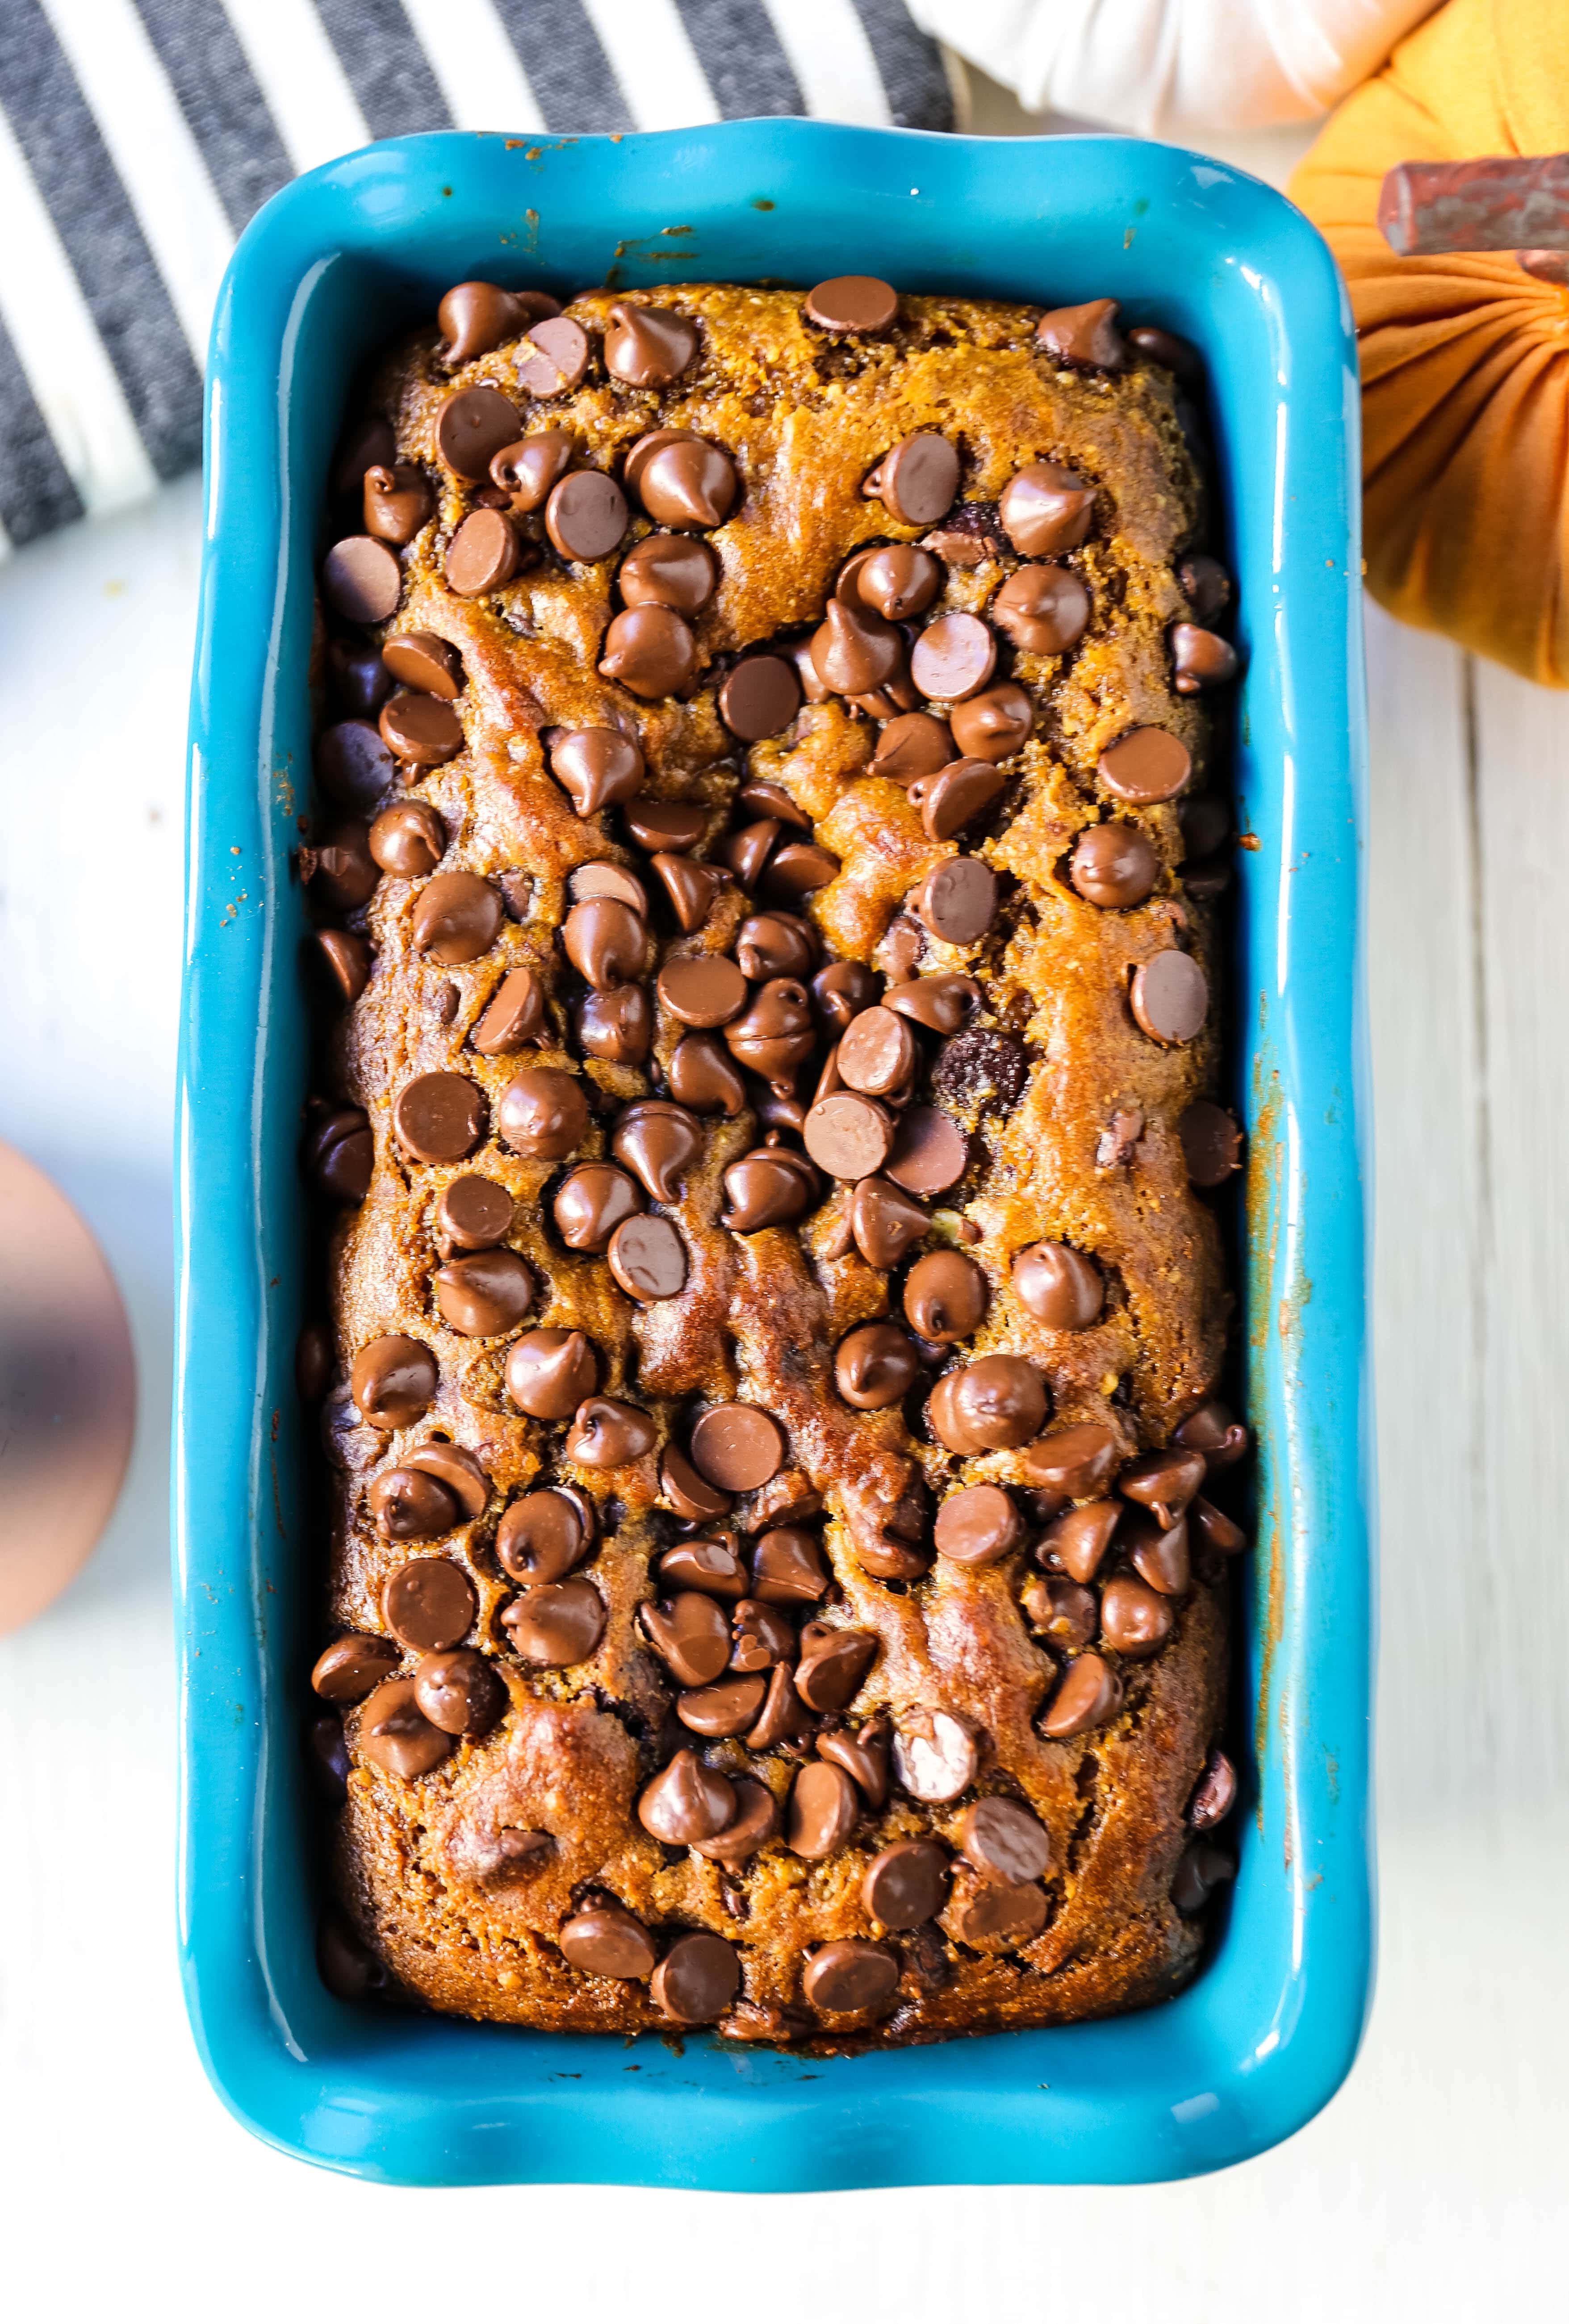 Chocolate Chip Pumpkin Bread Moist pumpkin spiced bread with rich chocolate chips. Tips and tricks for making the best pumpkin chocolate chip bread! www.modernhoney.com #pumpkinbread #pumpkin #pumpkinrecipes #chocolatechippumpkinbread 